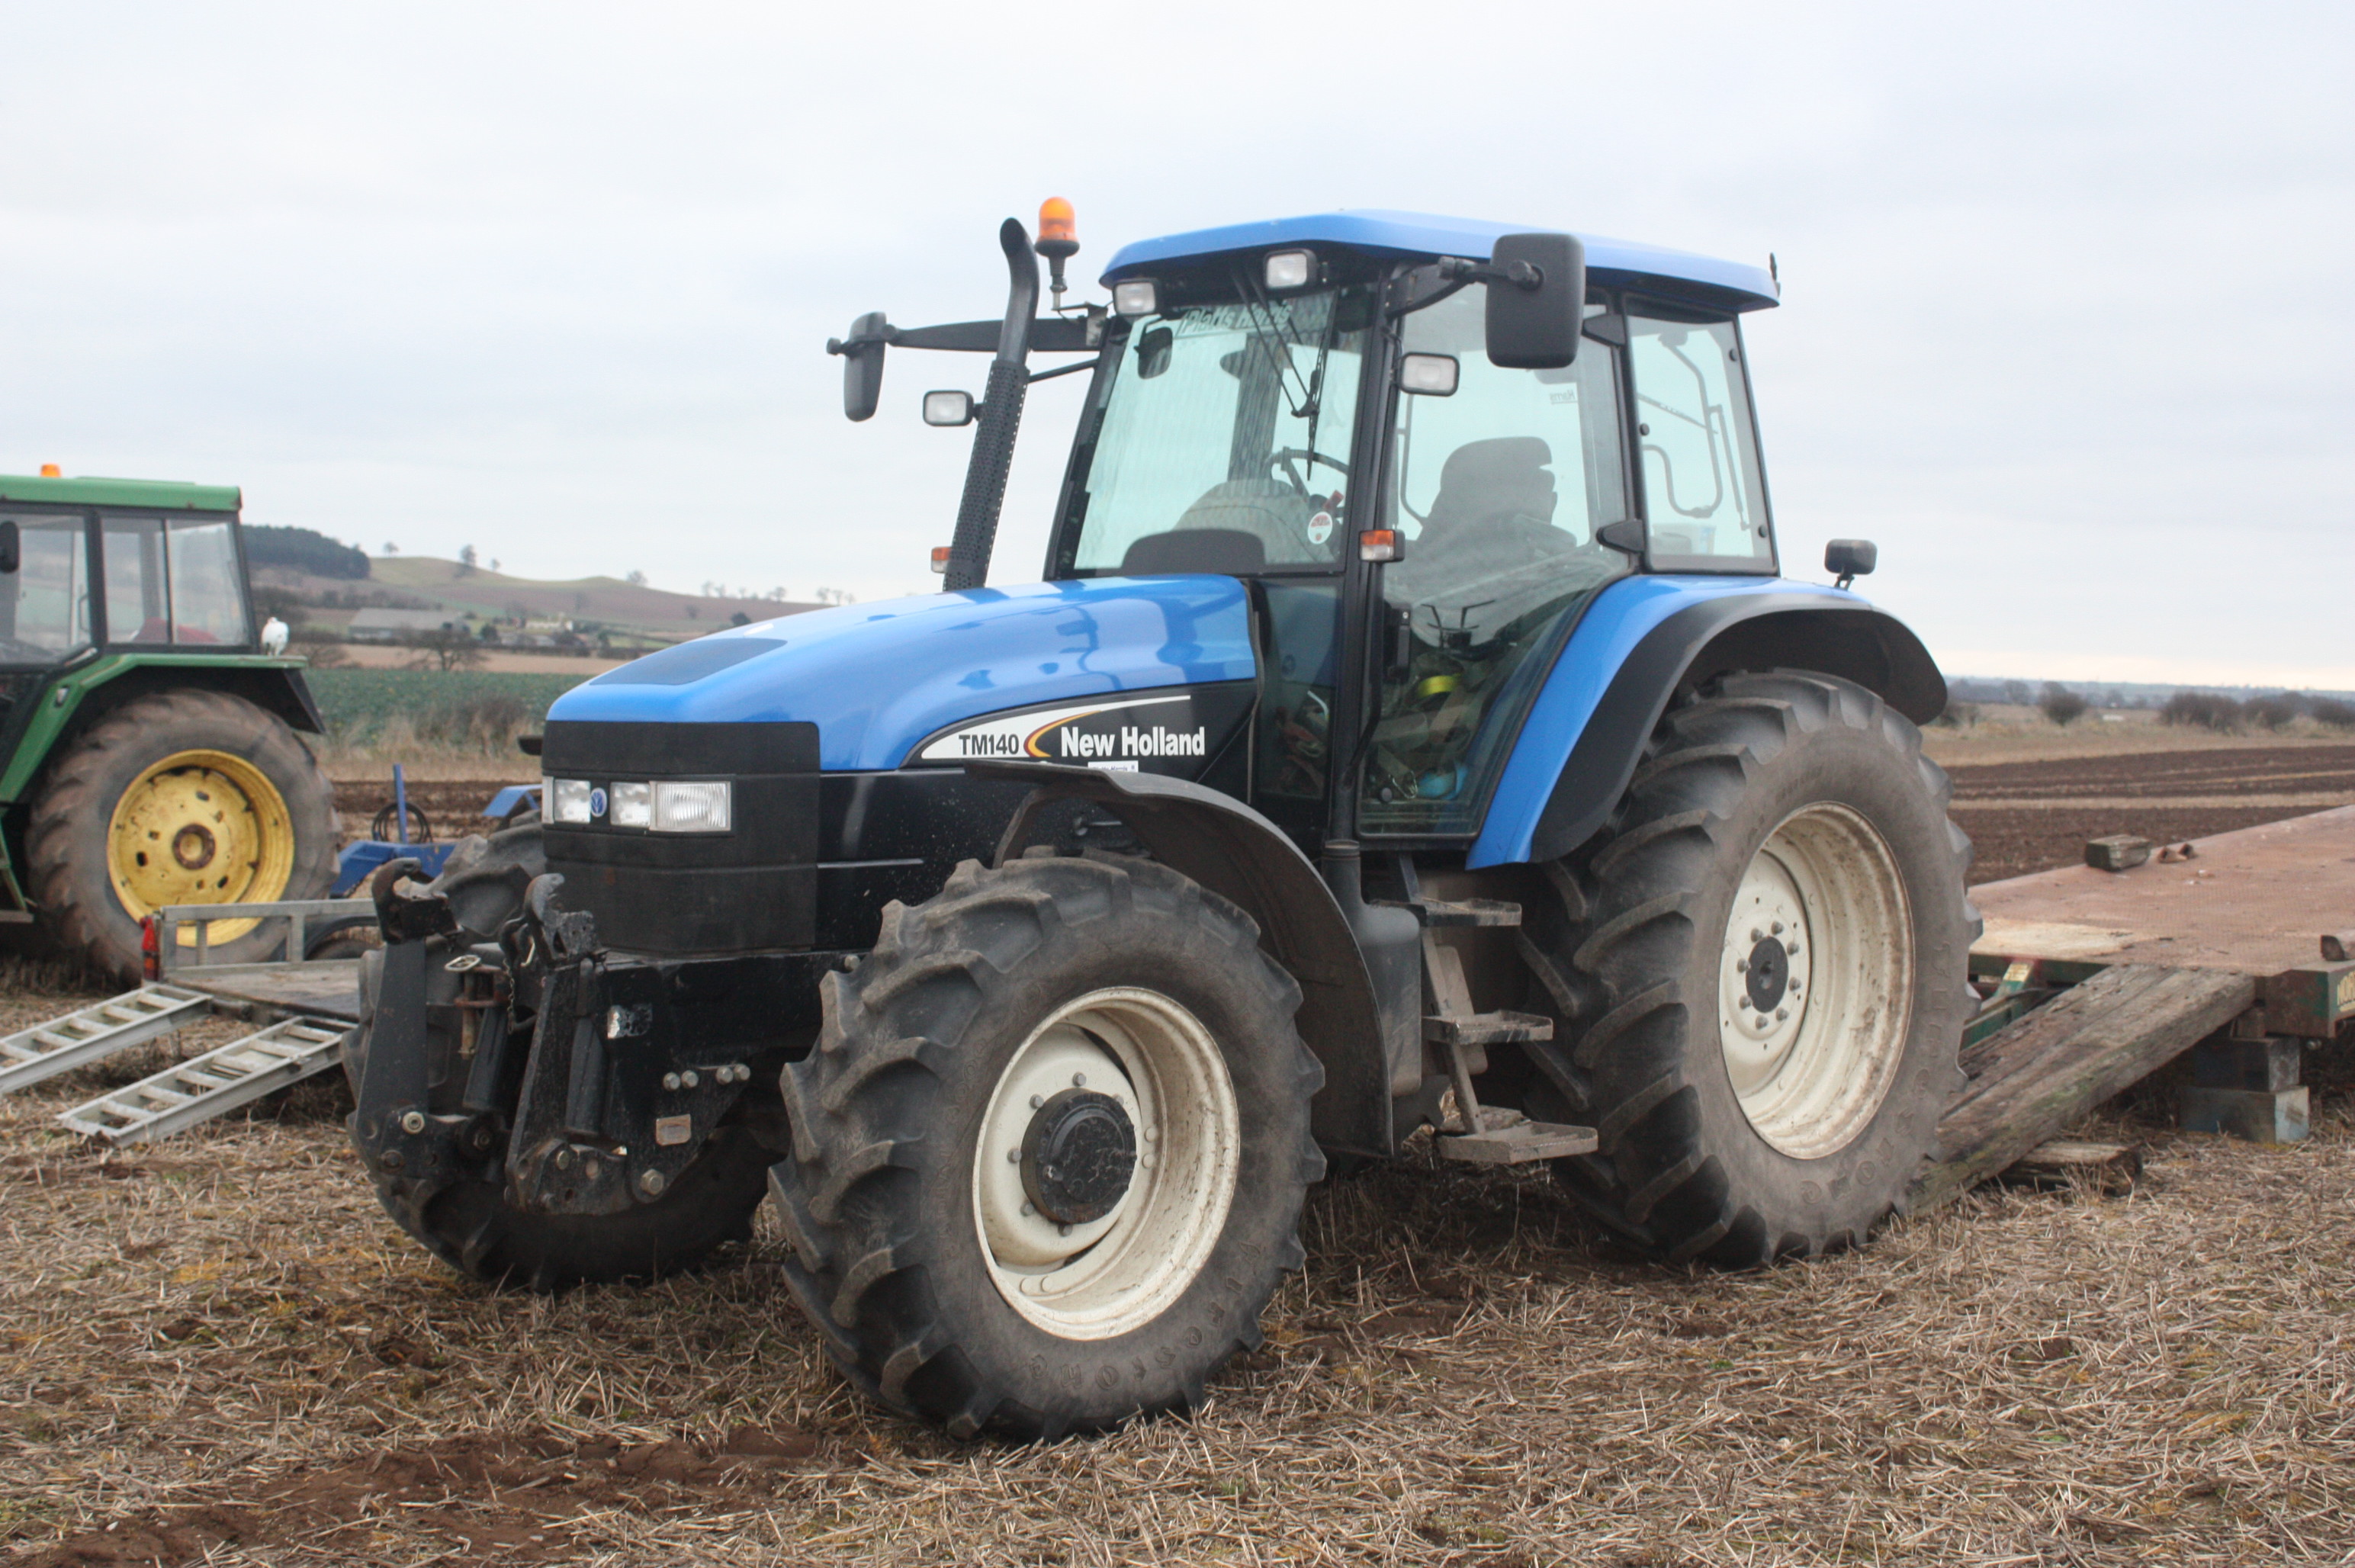 New Holland TM140 - Tractor & Construction Plant Wiki - The classic ...